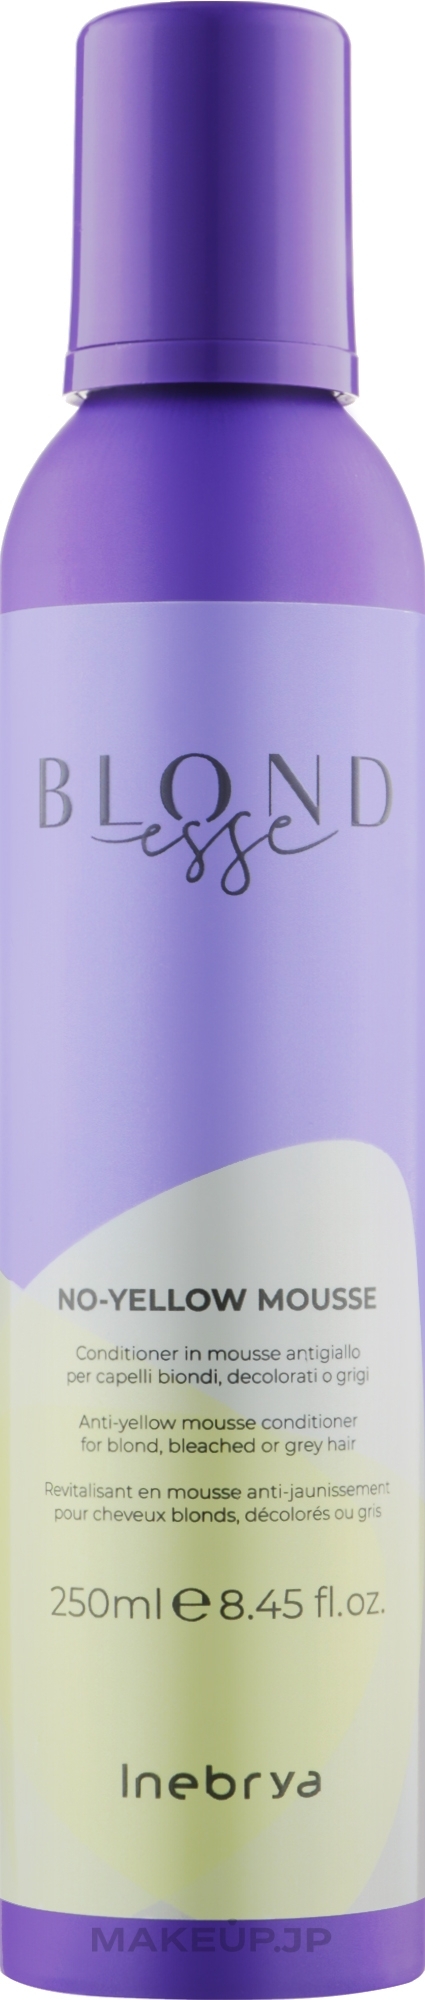 Mousse Conditioner for Blonde, Bleached & Gray Hair - Inebrya Blondesse No-Yellow Mousse Conditioner — photo 250 ml